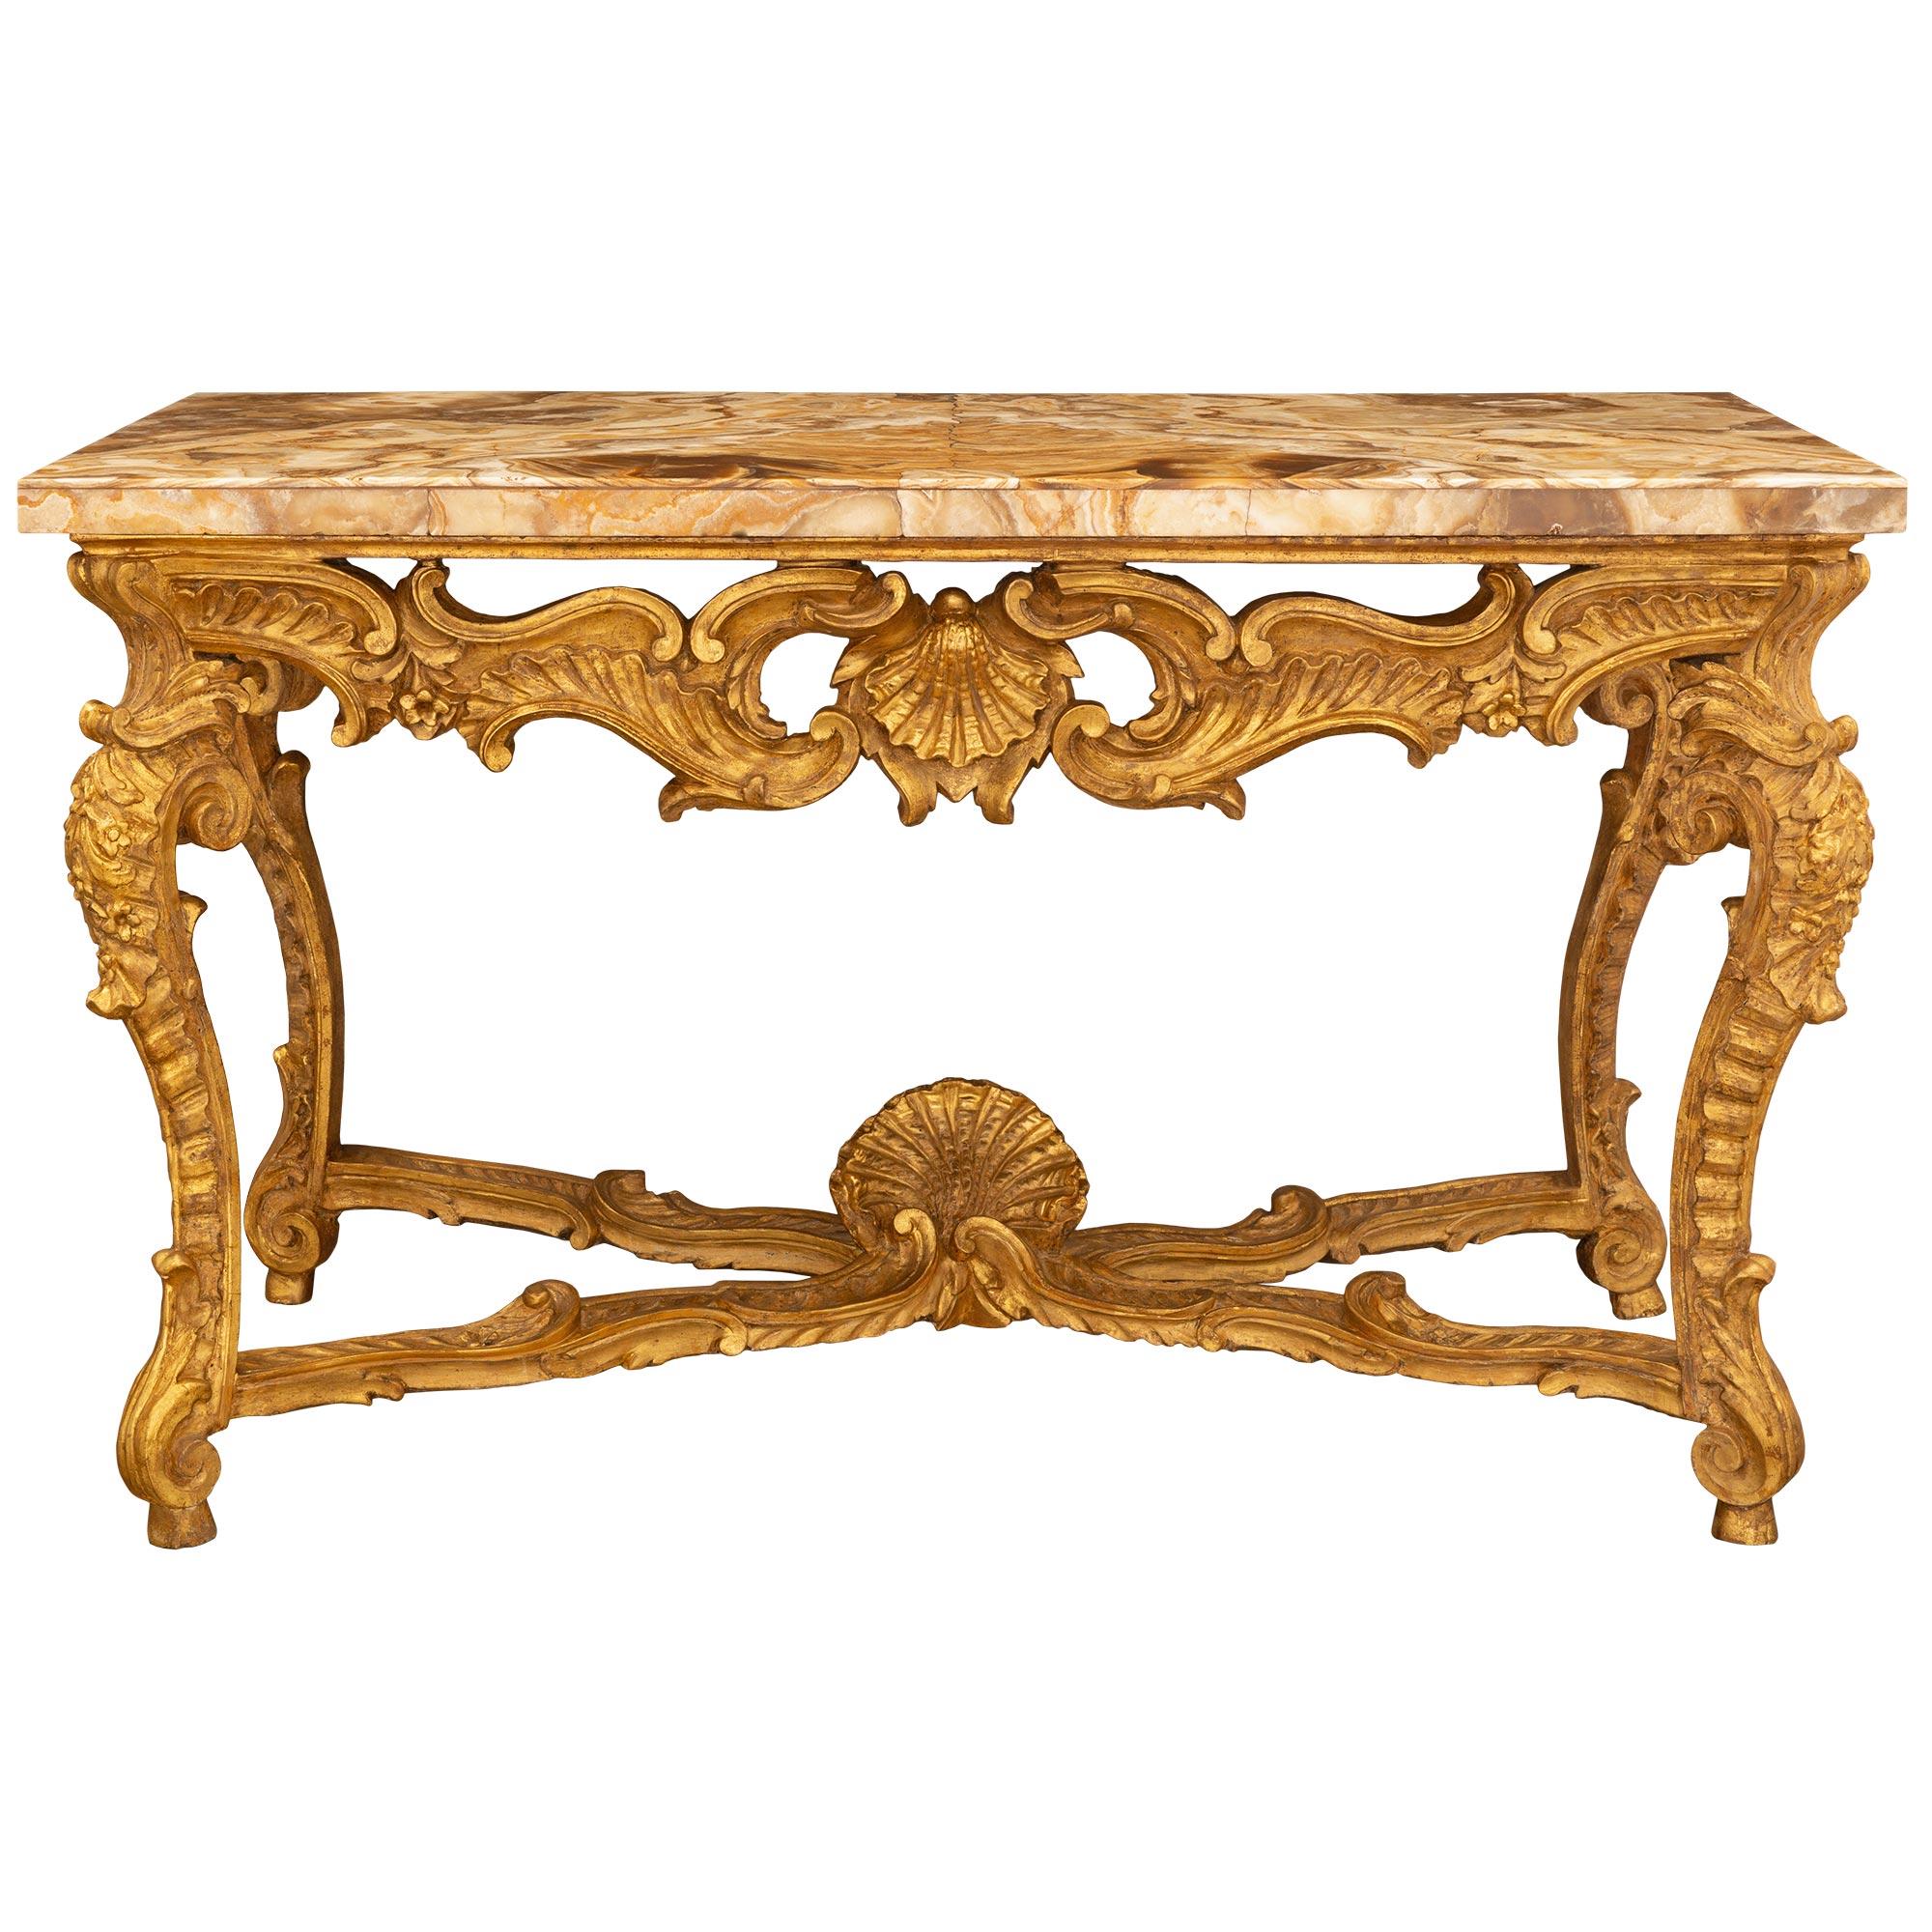 Italian 18th Century Louis XV Period Giltwood and Alabastro Fiorito Marble Co In Good Condition For Sale In West Palm Beach, FL